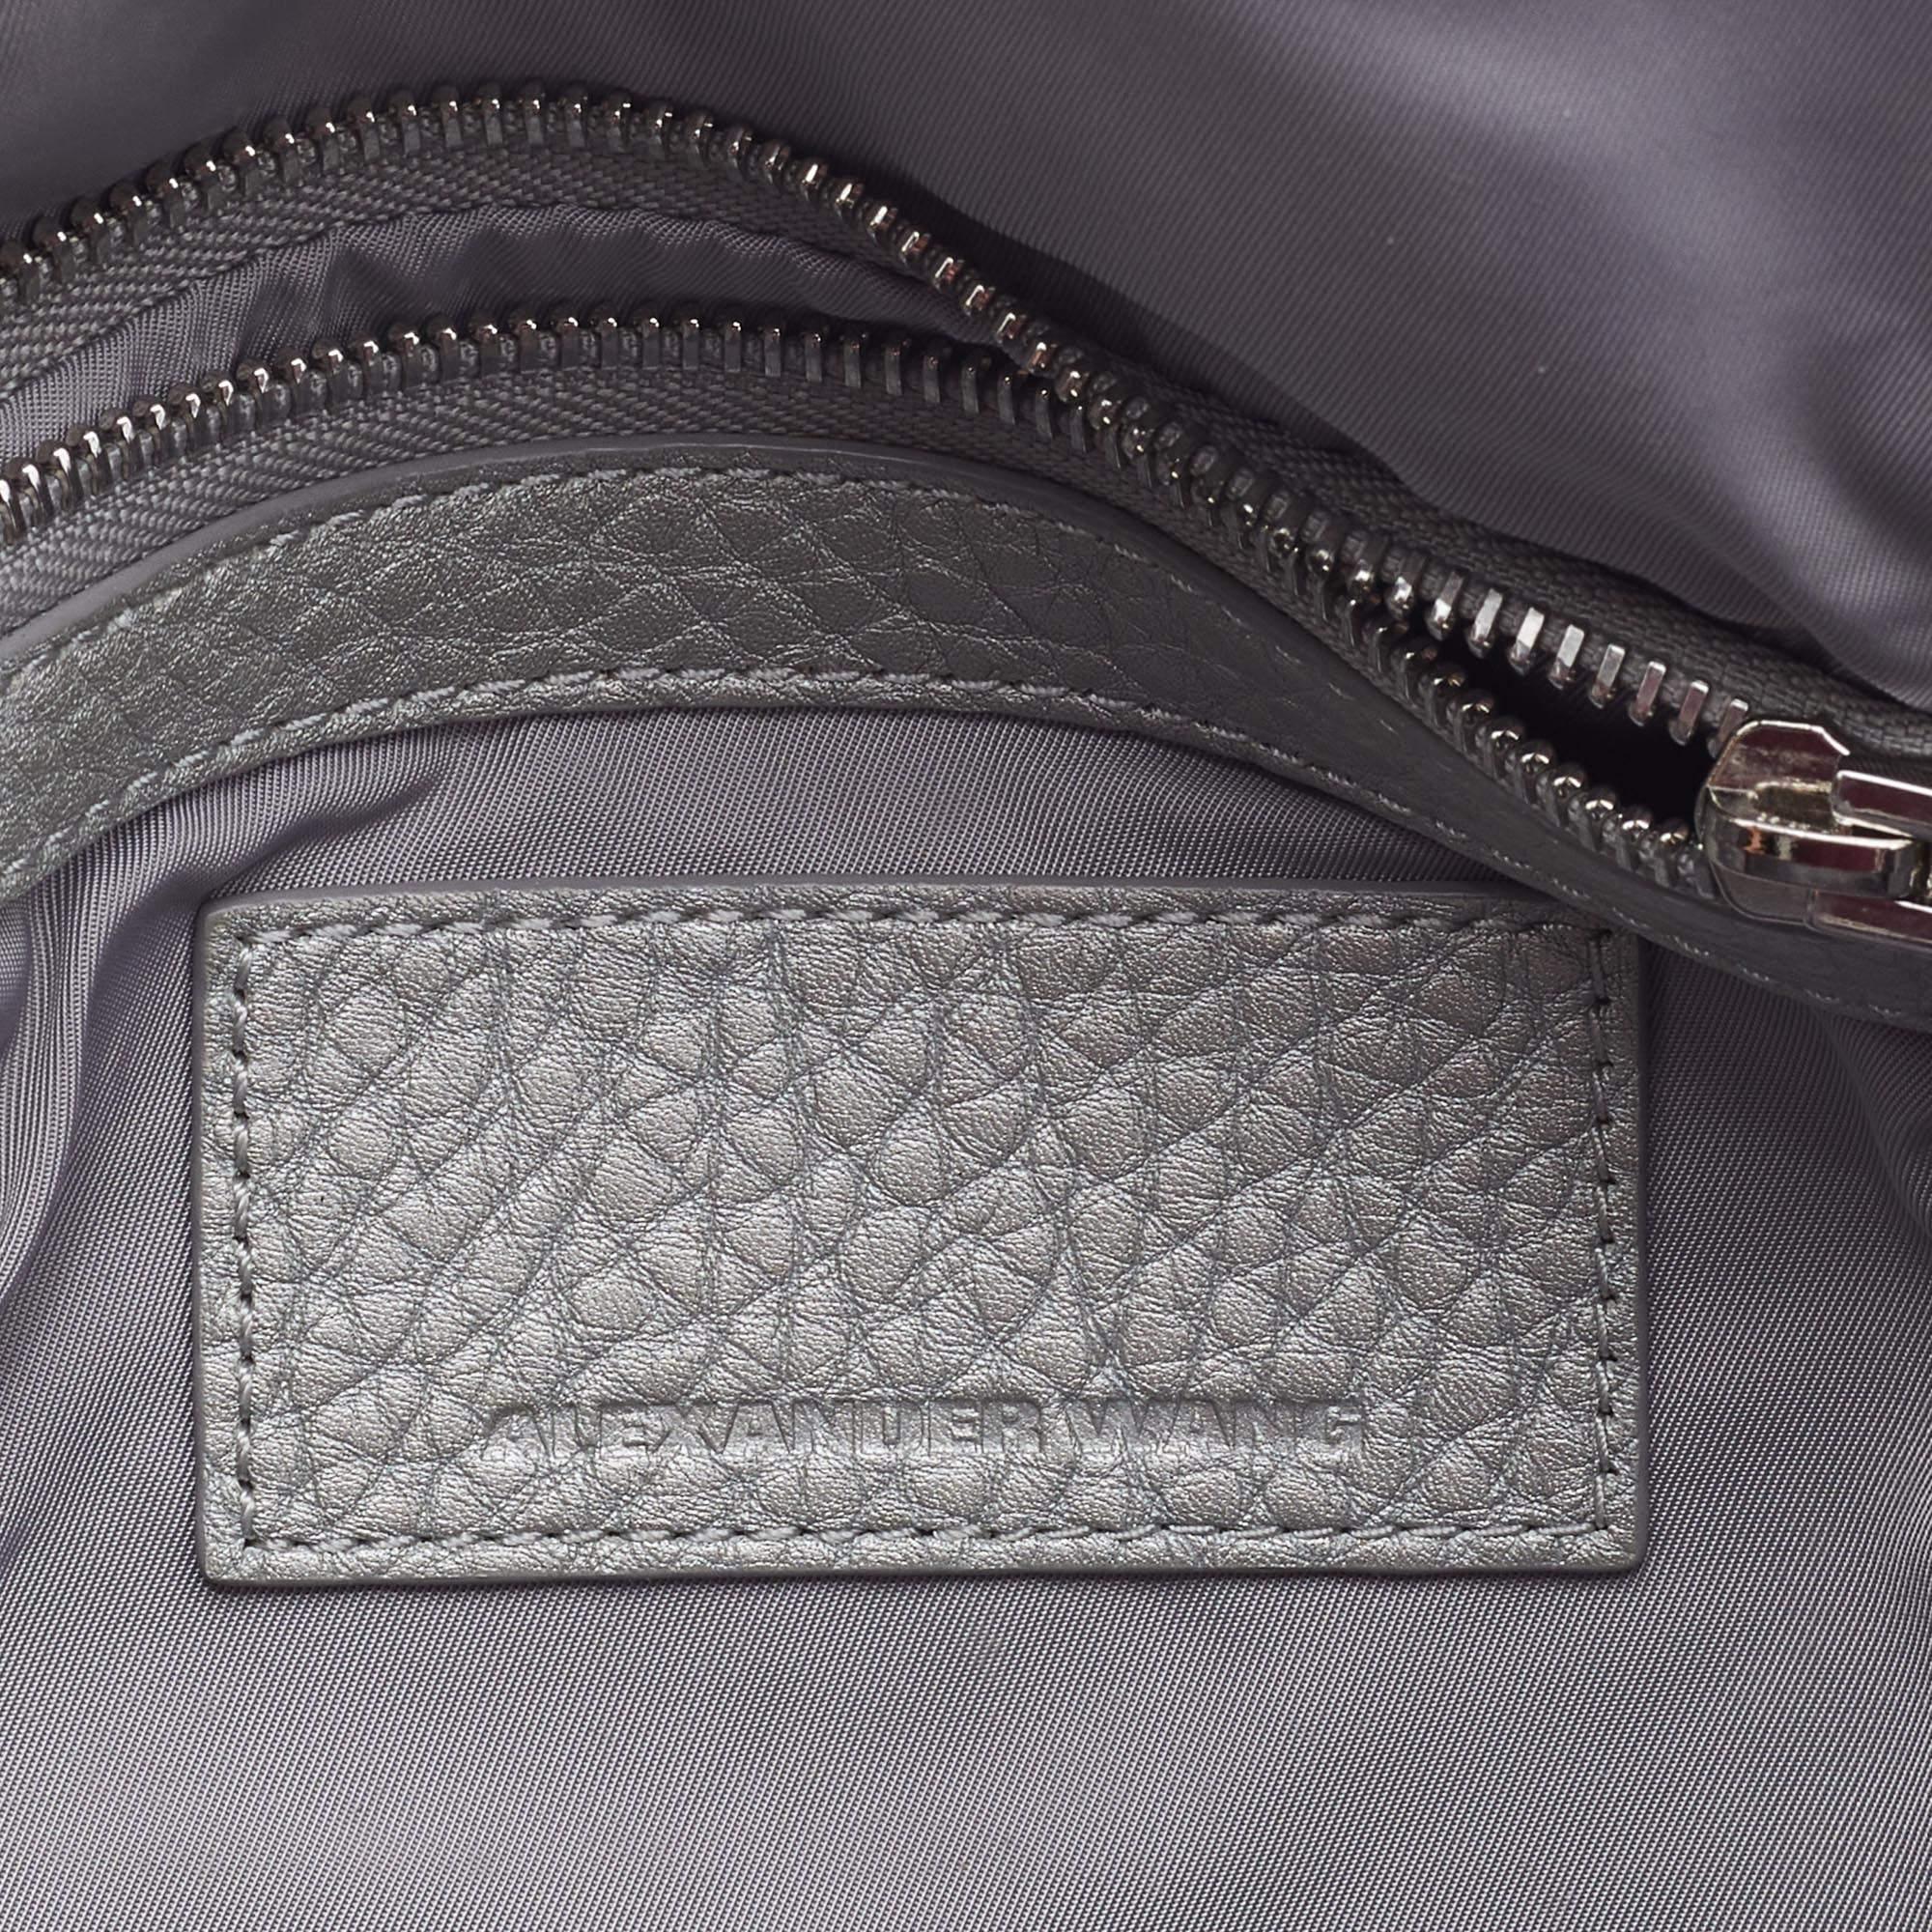 Alexander Wang Silver Textured Leather Rocco Bag 7